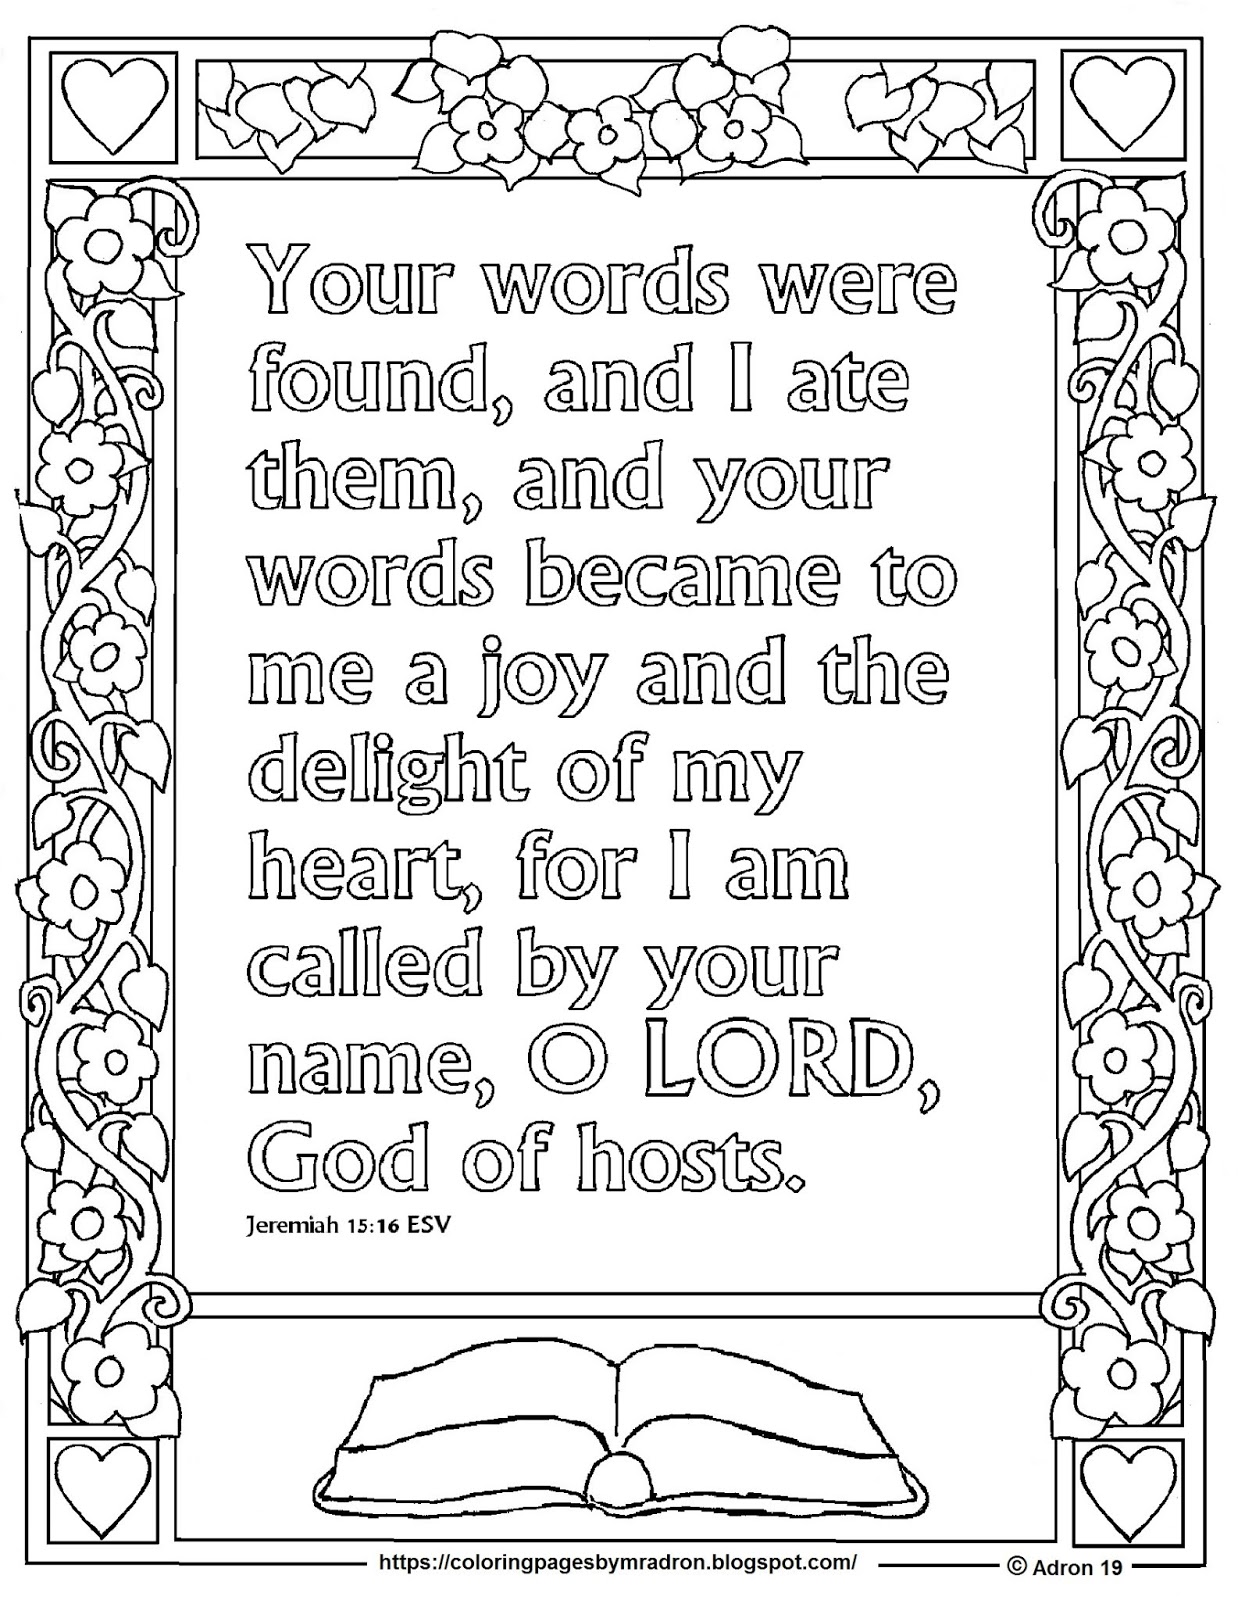 Coloring Pages For Kids By Mr Adron Free Jeremiah 15 16 Print And Color Page Your Words Were Found And I Ate Them Bible Verse